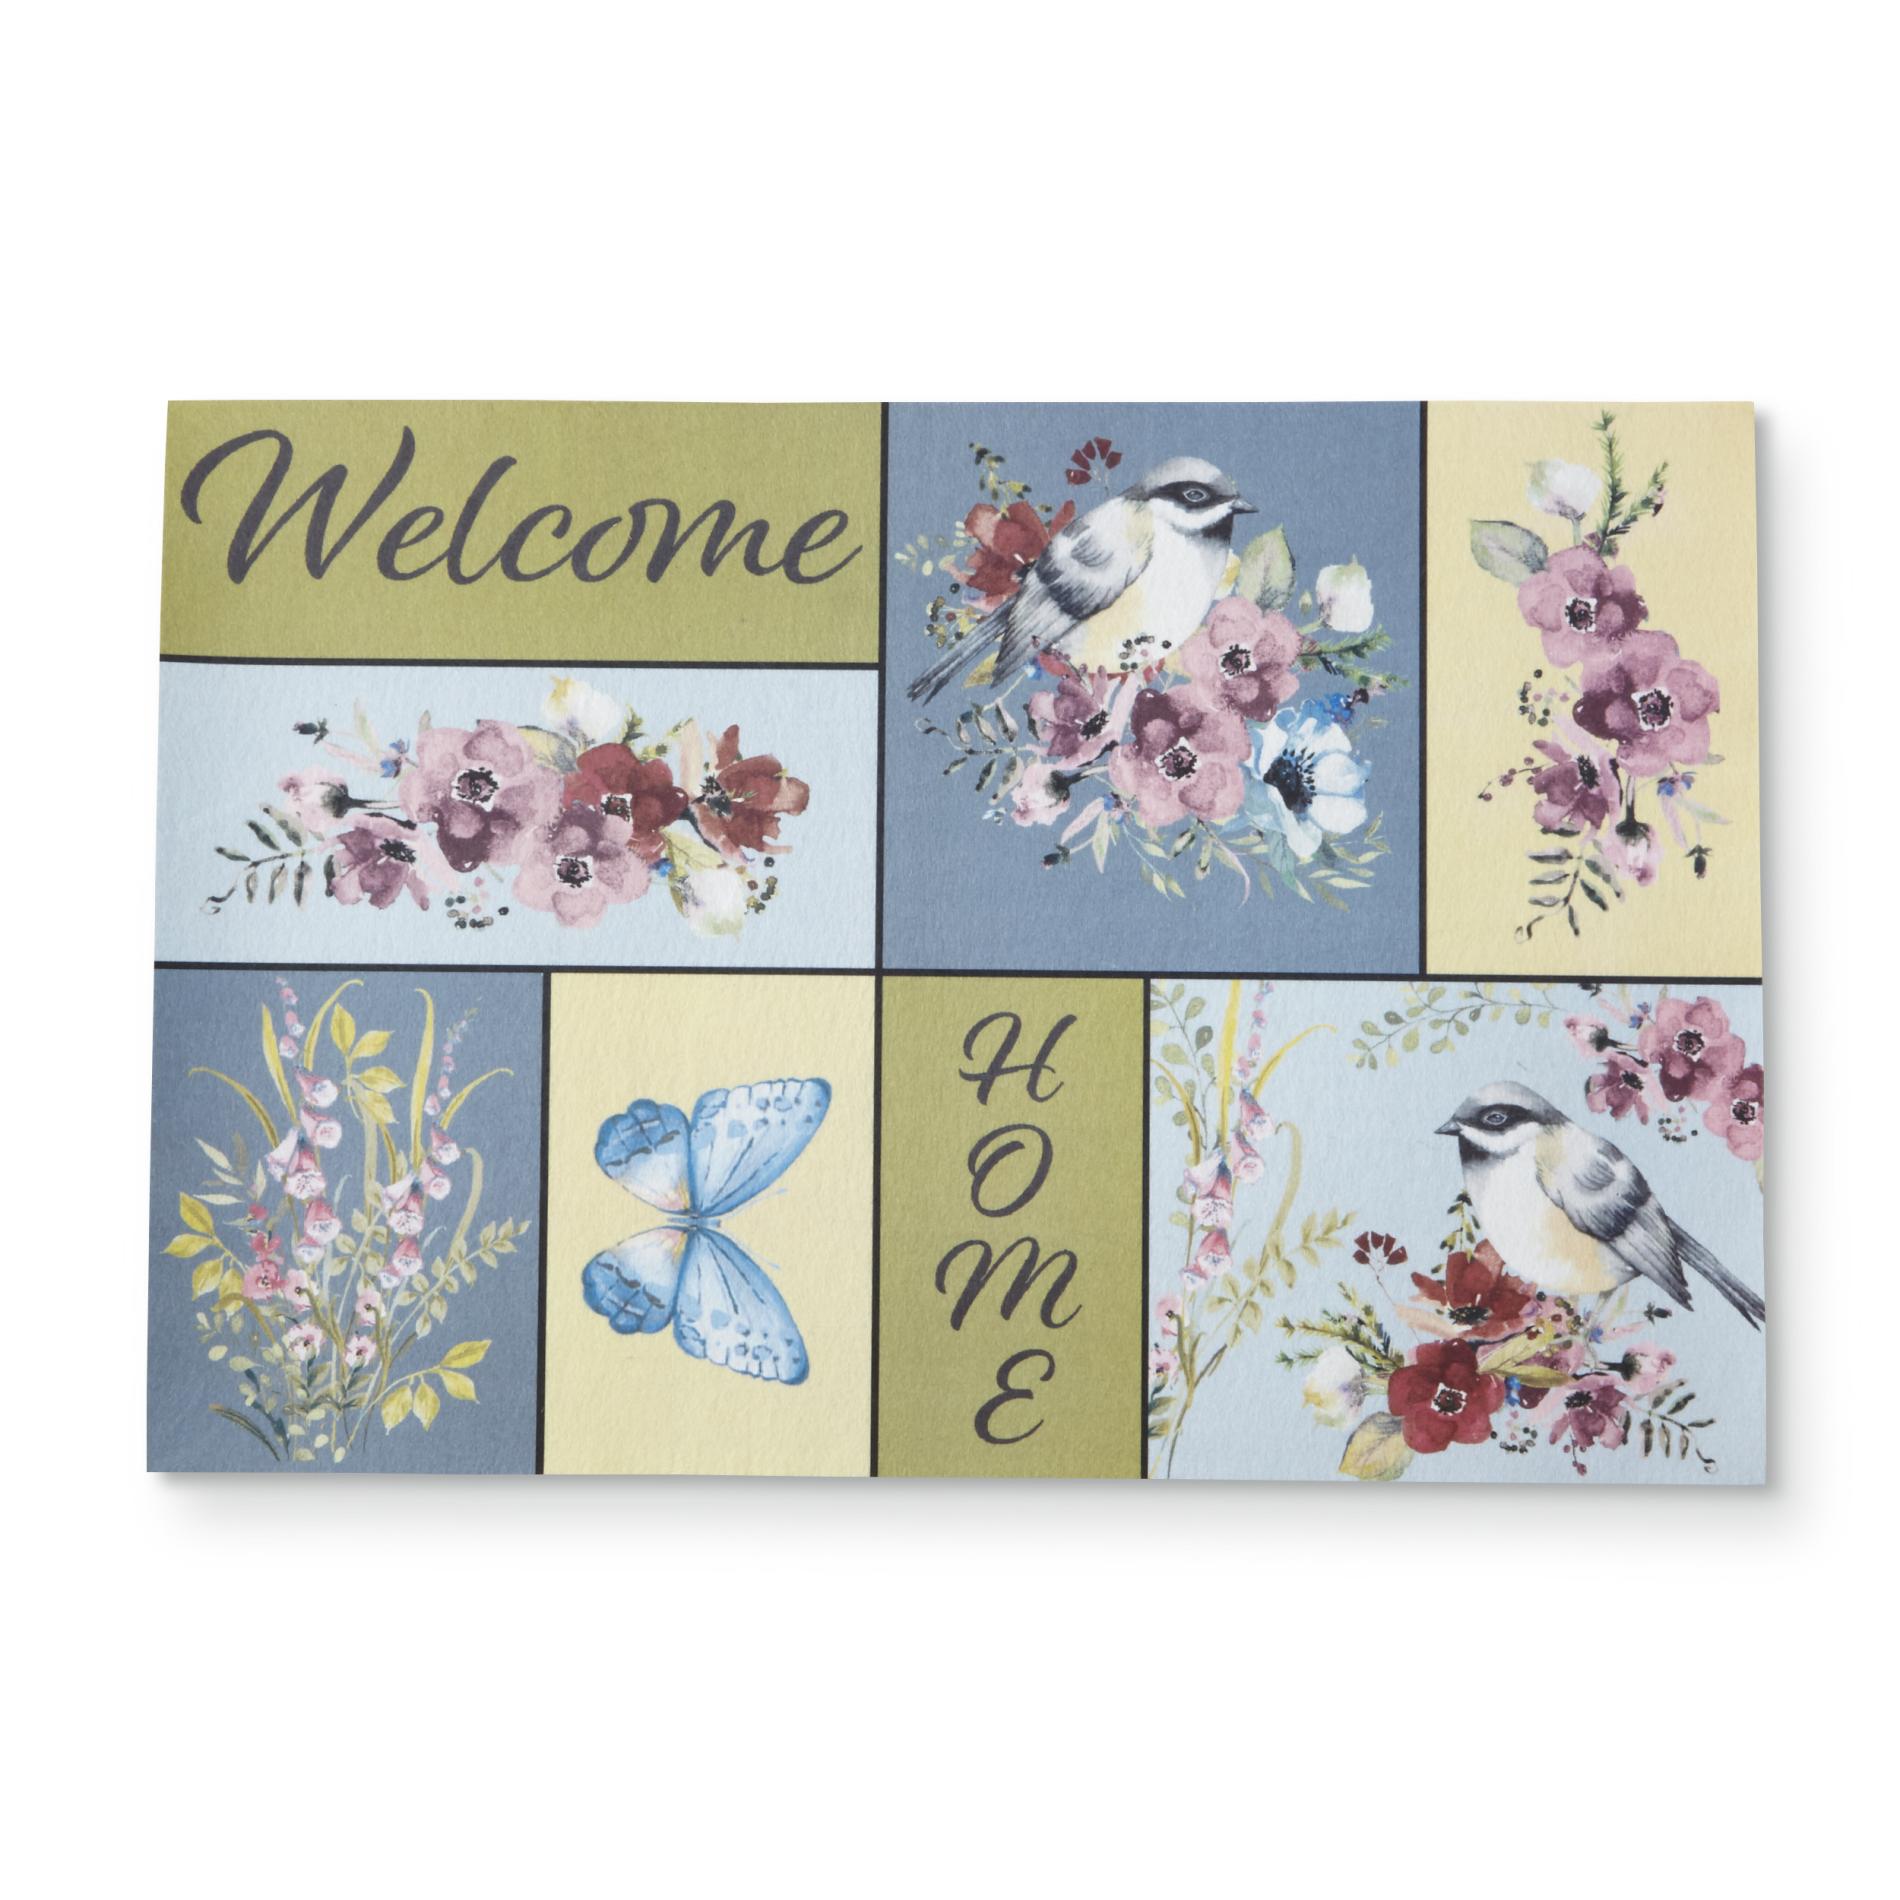 Welcome Mat - Patchwork